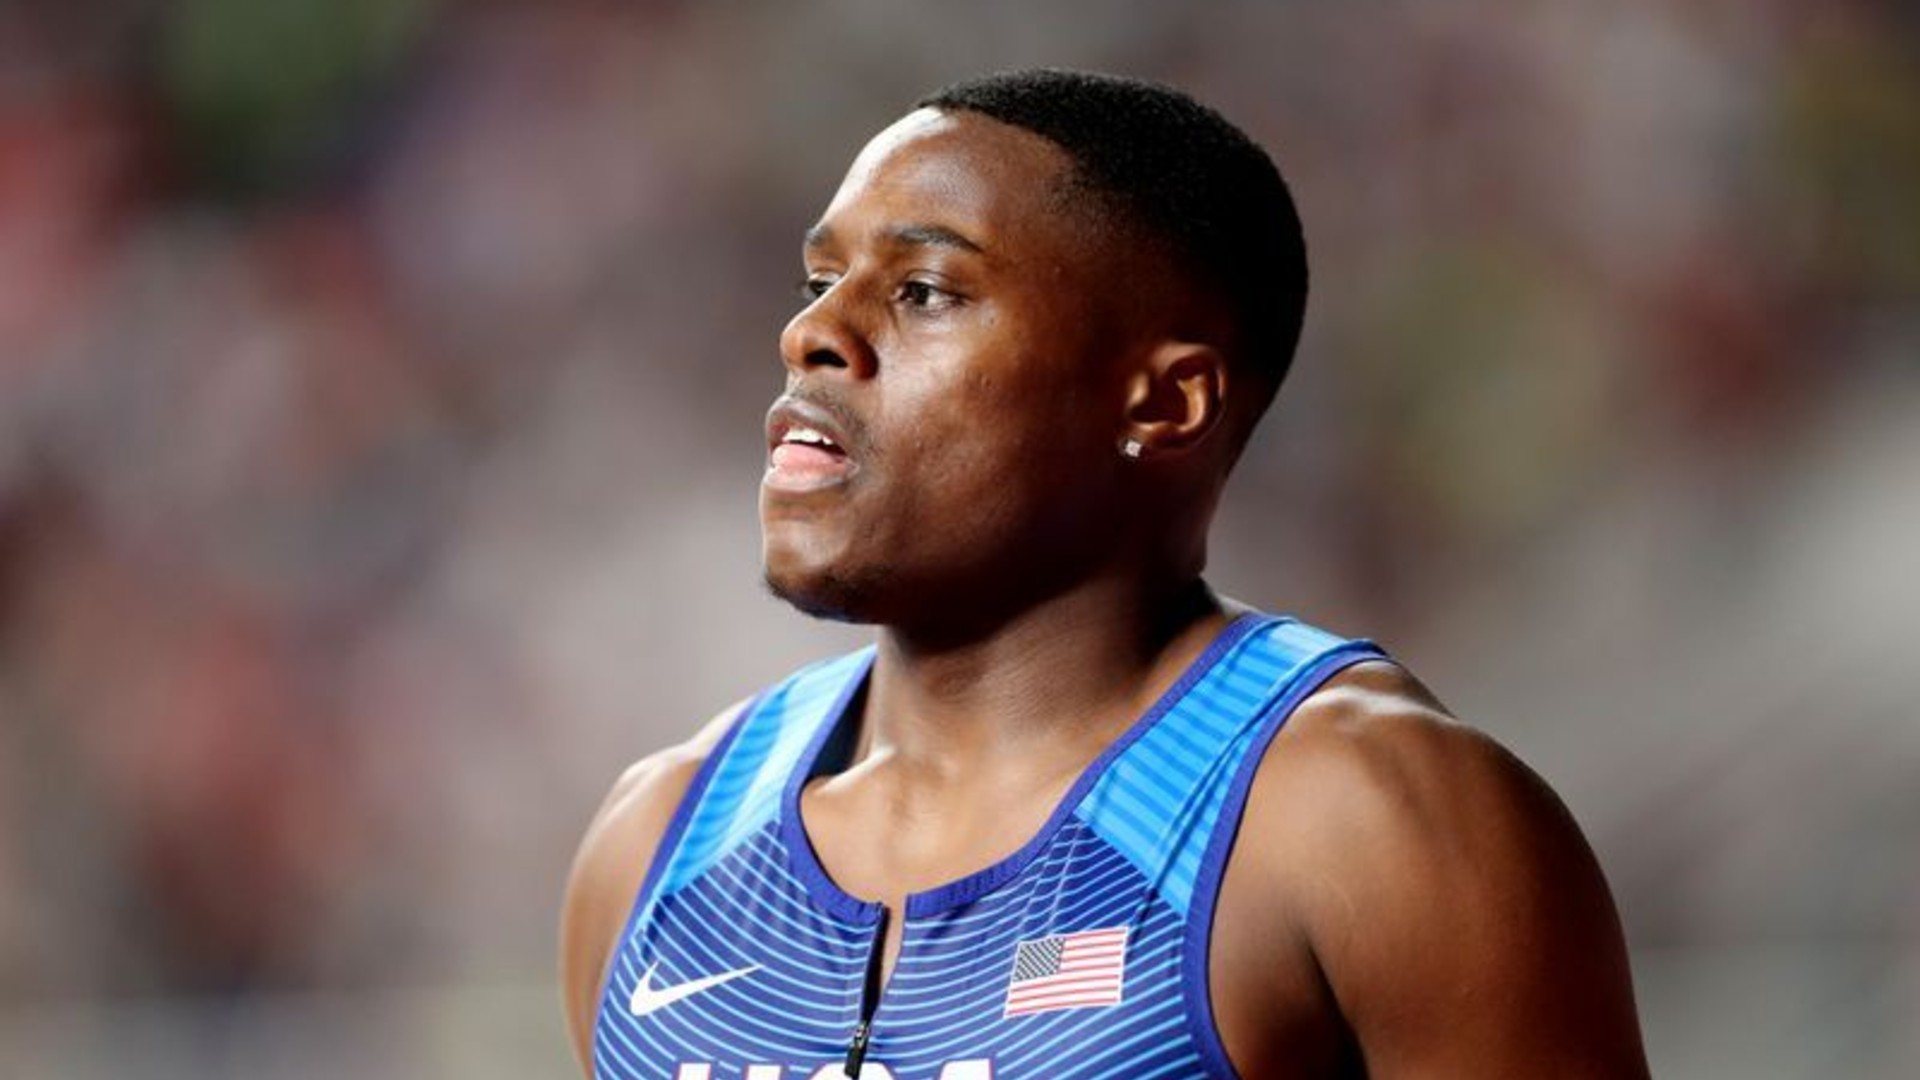 Christian Coleman in a file photo; Credit: Twitter